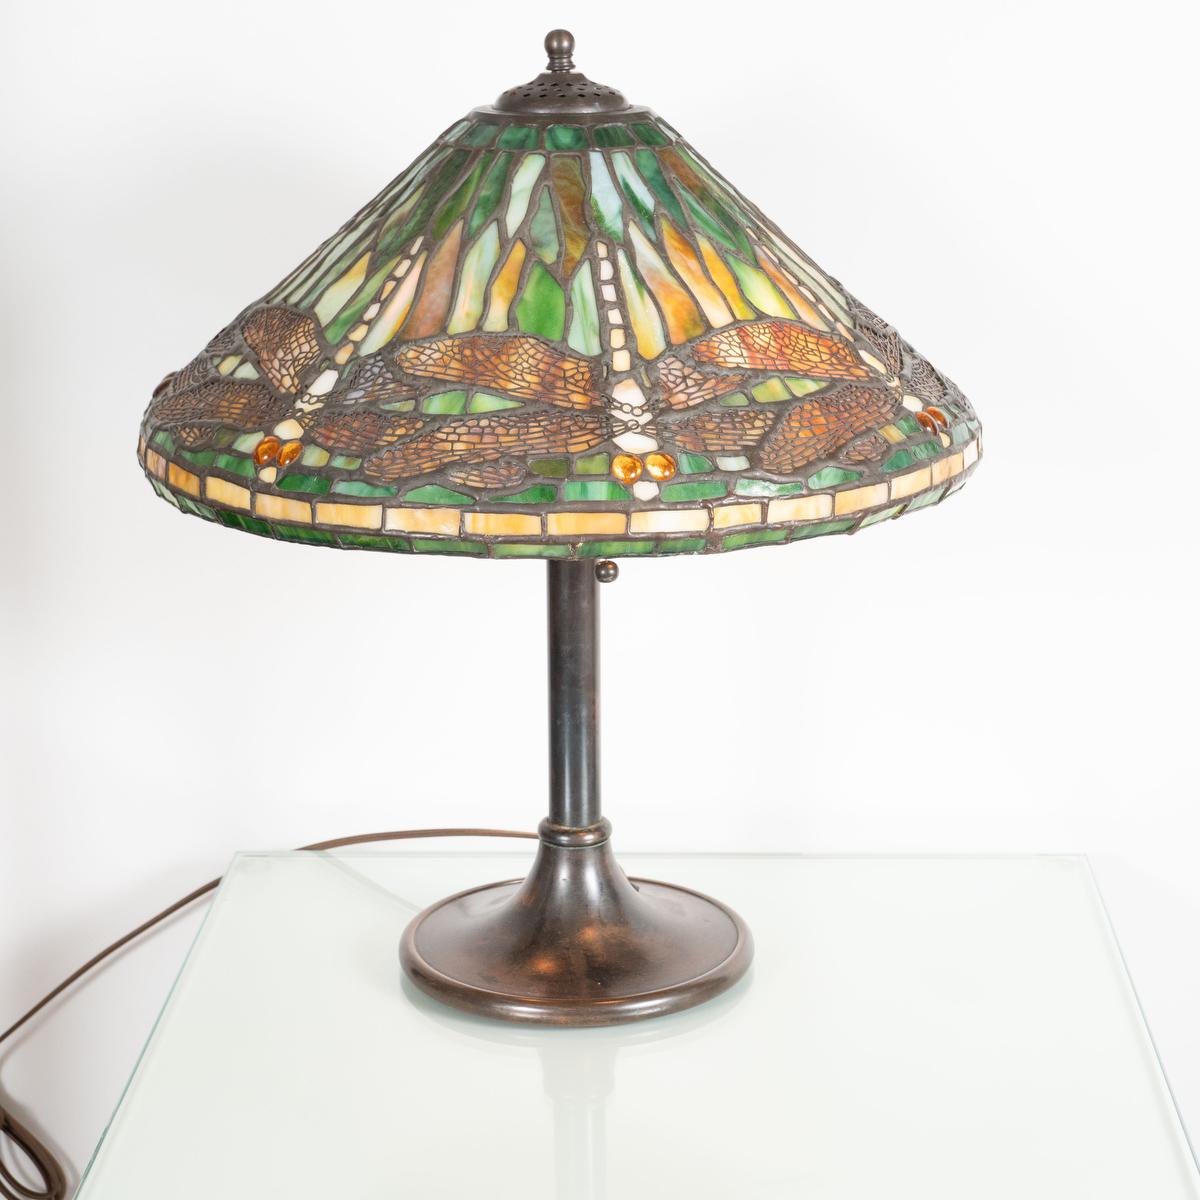 Single table lamp with inlaid glass and openwork metal shade in the style of Lalique.